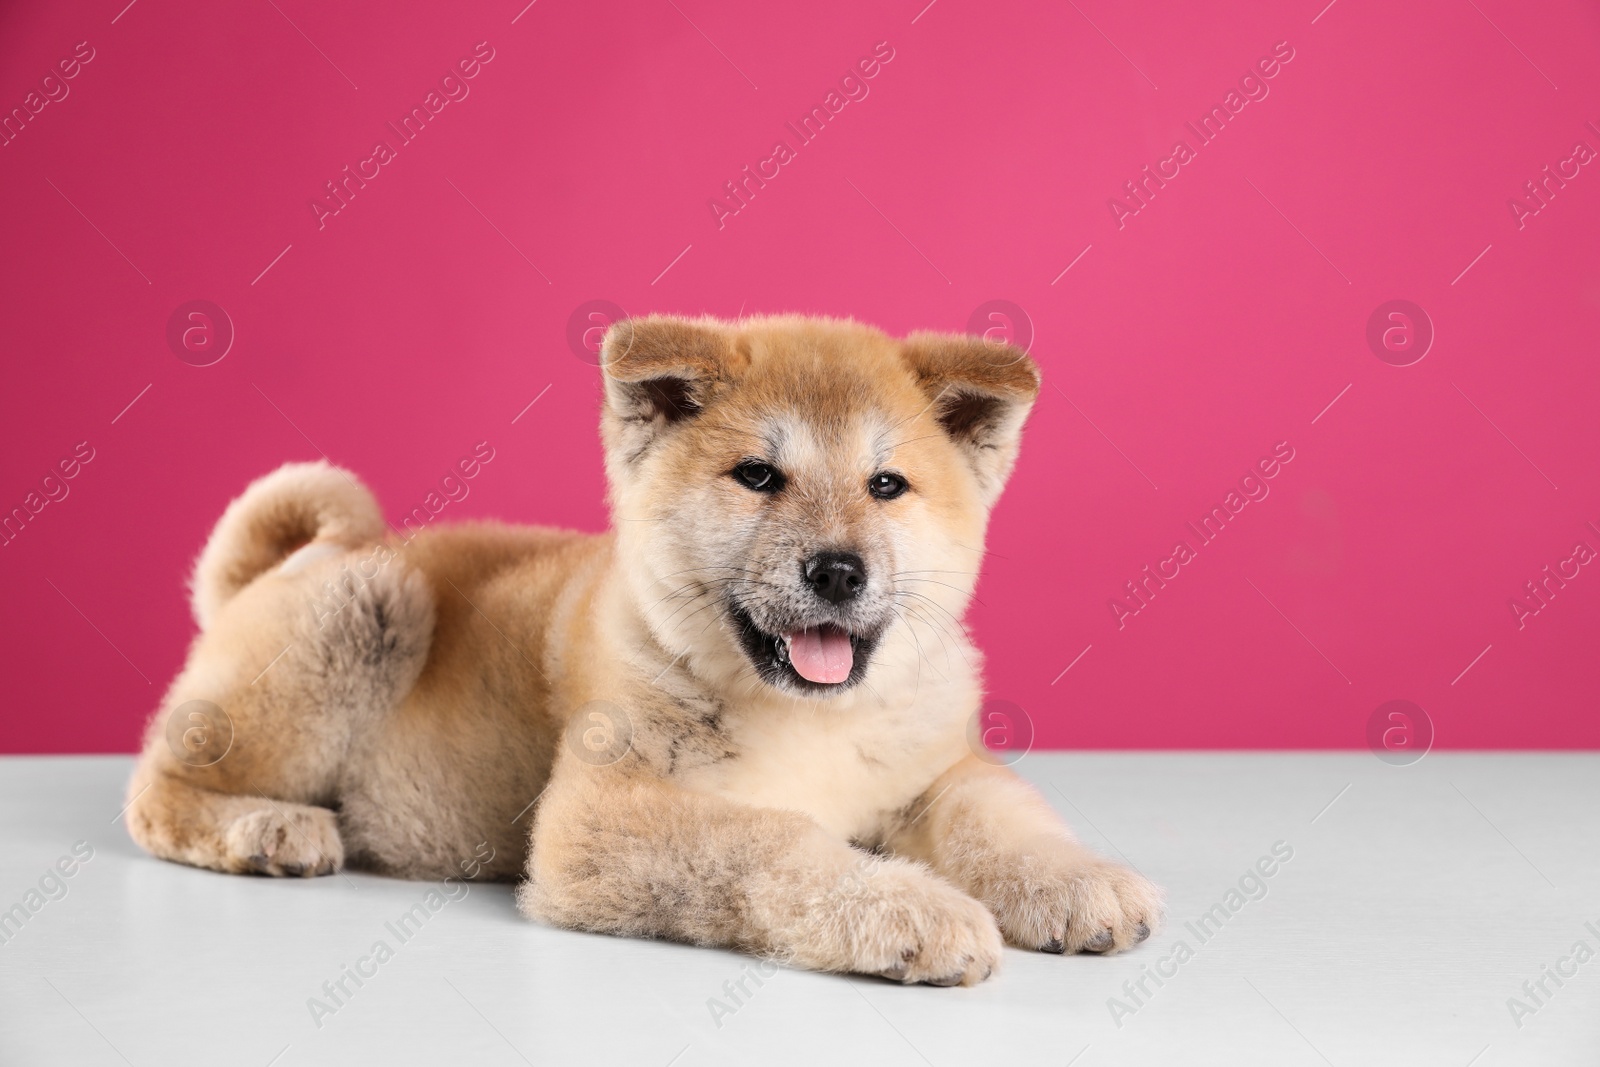 Photo of Adorable Akita Inu puppy looking into camera on pink background, space for text